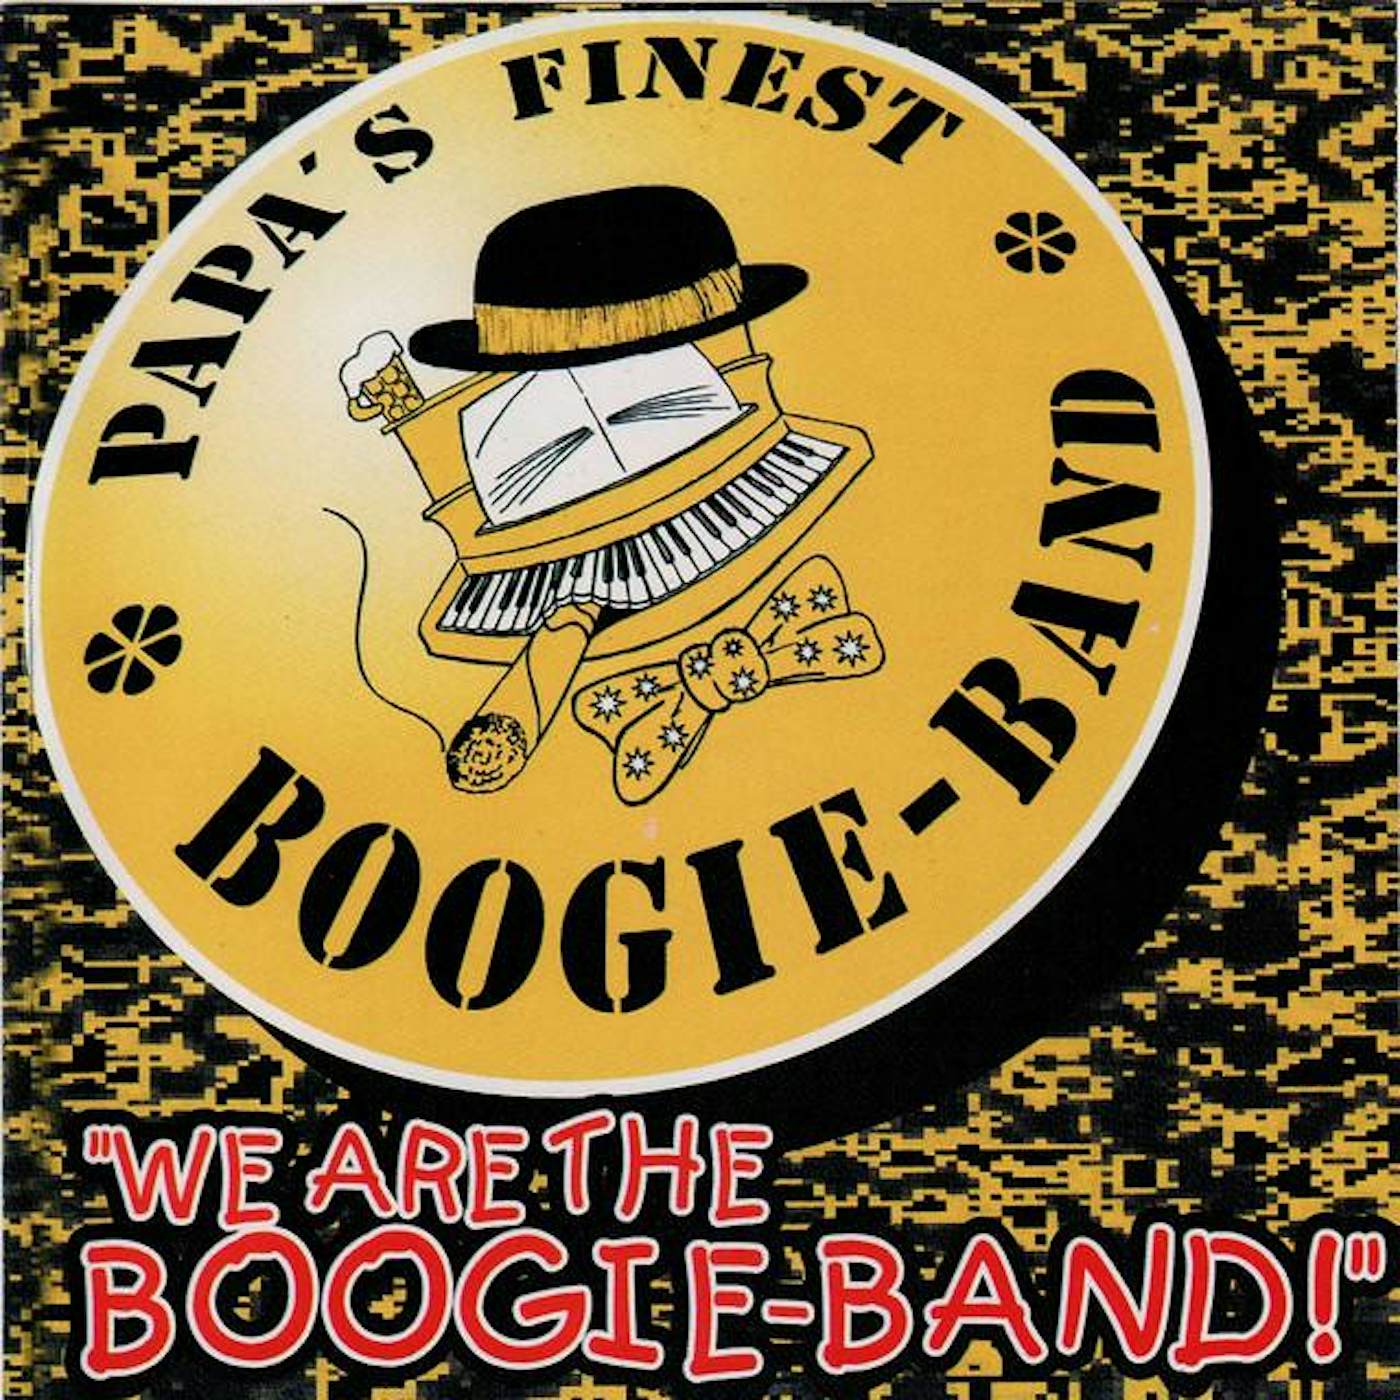 Papa's Finest Boogie-Band